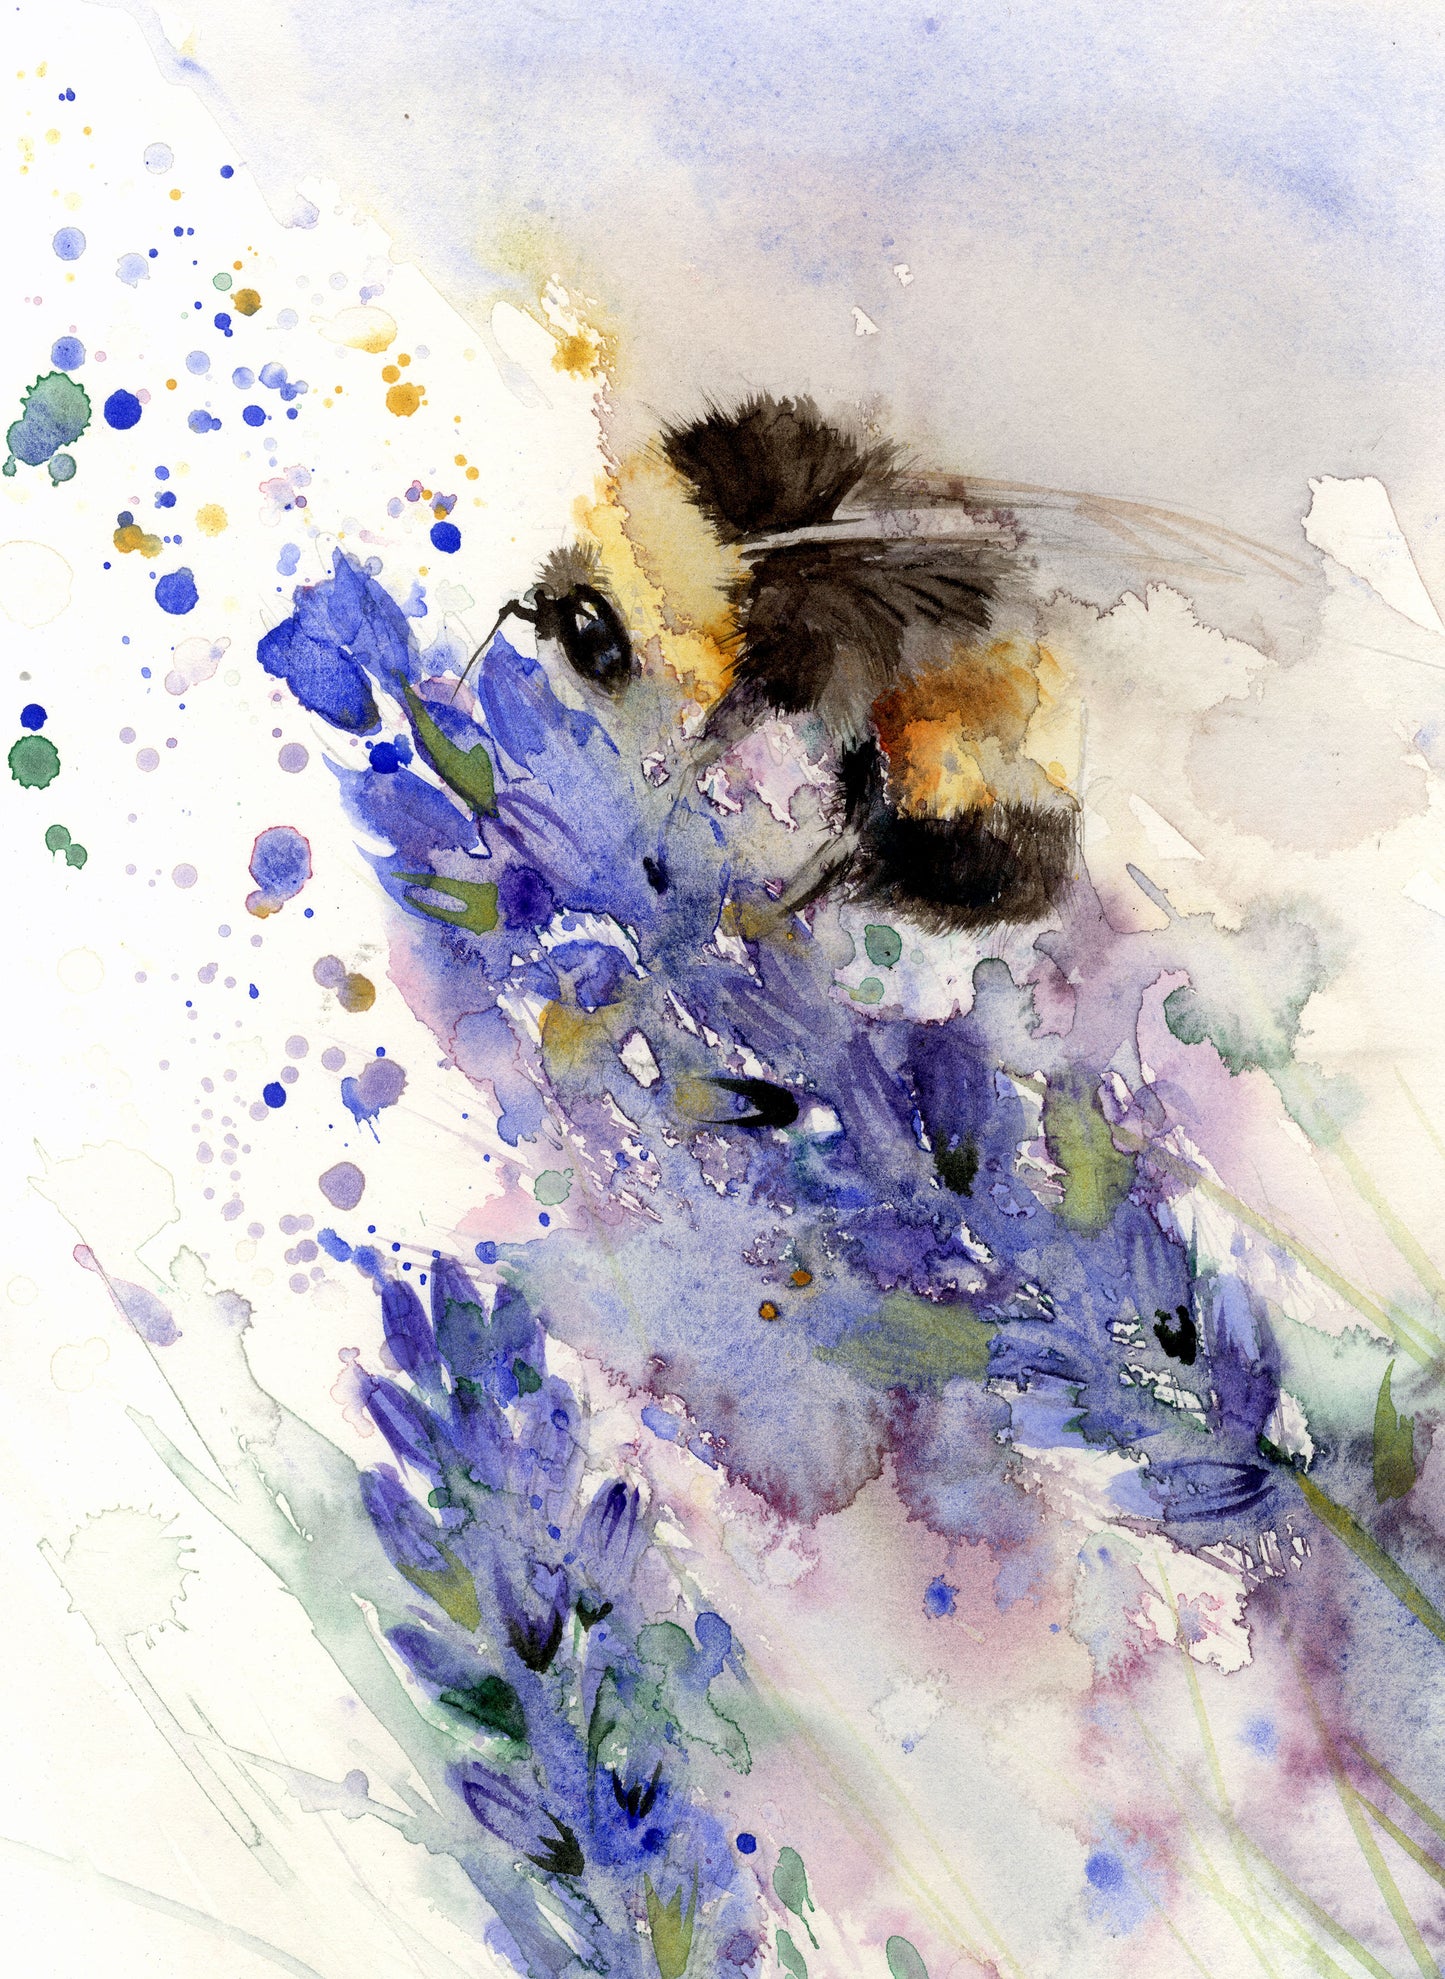 LIMITED EDITON PRINT of a BUMBLE BEE on a lavender flower - Jen Buckley Art limited edition animal art prints